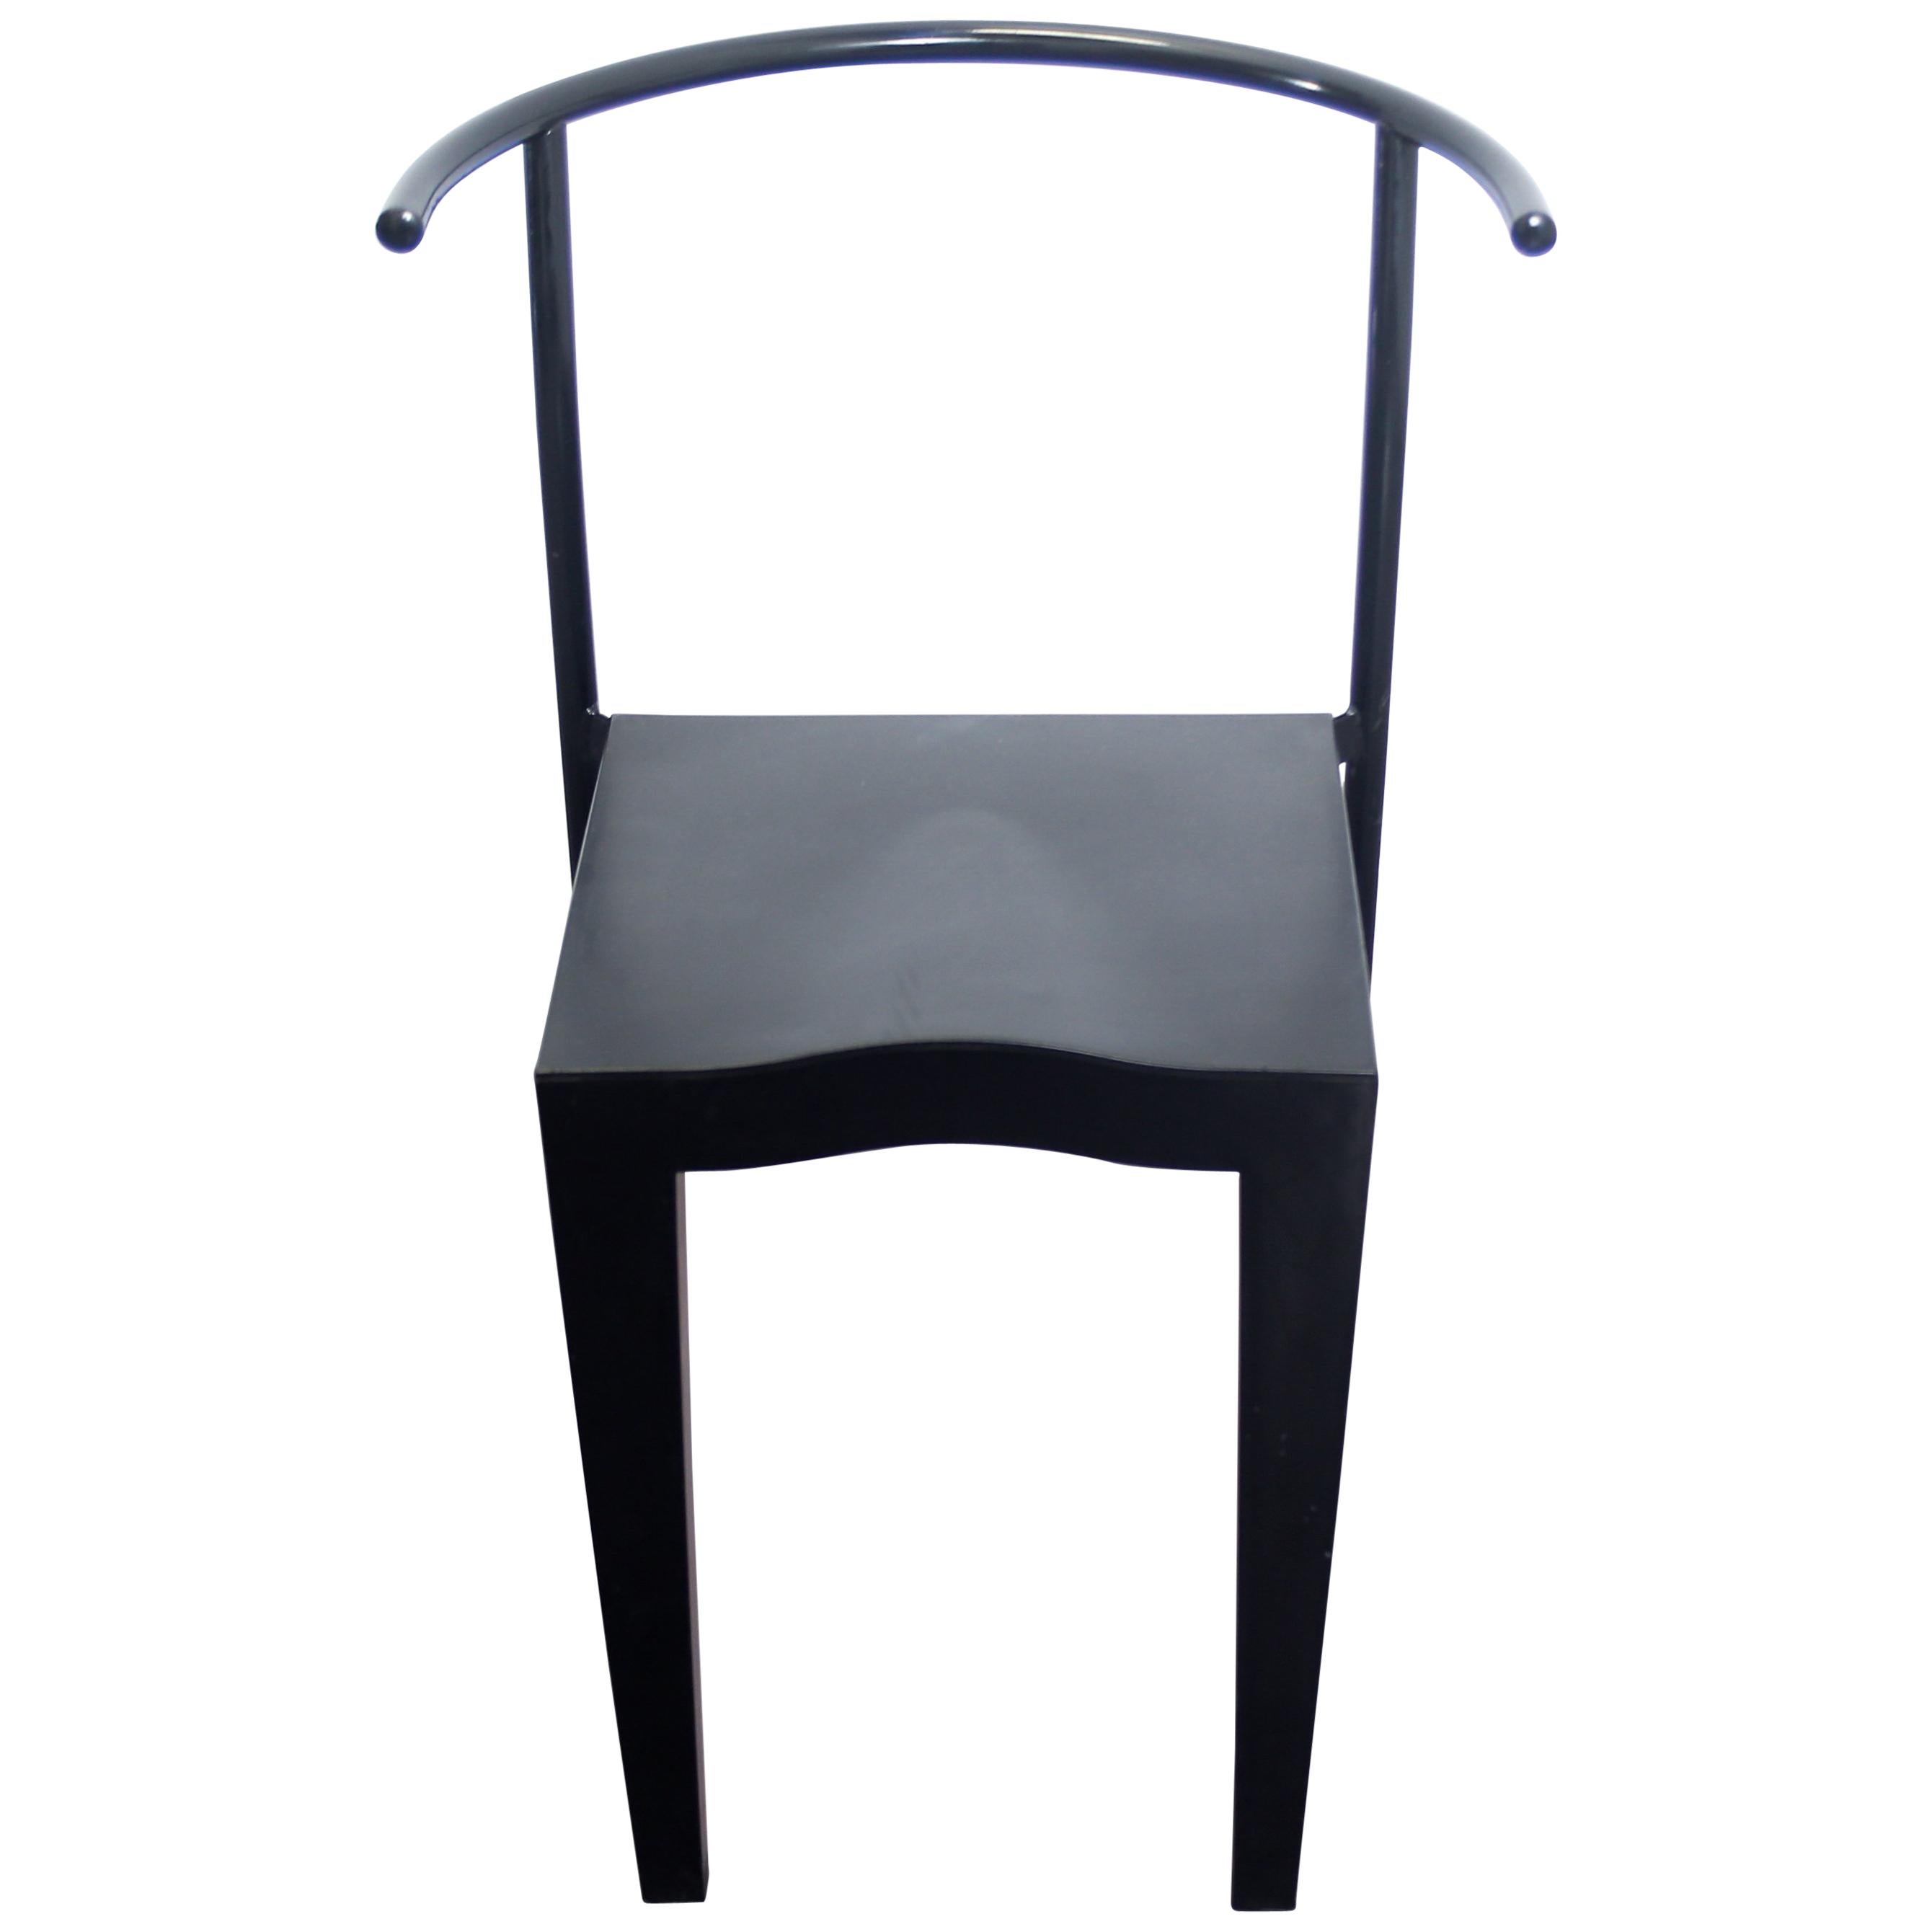 Dr. Glob Chair by Philippe Starck for Kartell